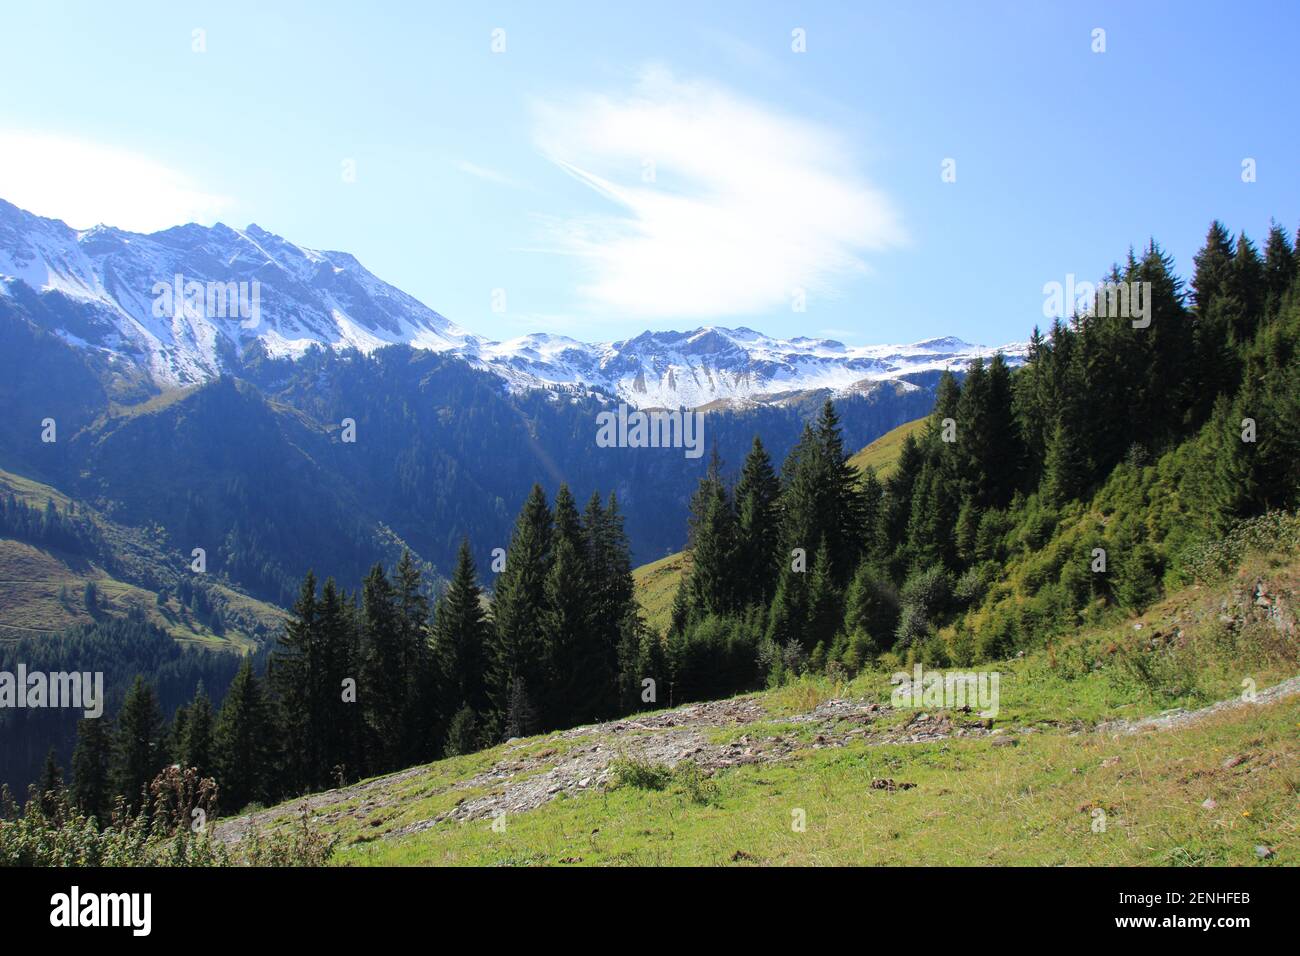 View of the snow-covered Alps near Saalbach Hinterglemm in Austria Stock Photo